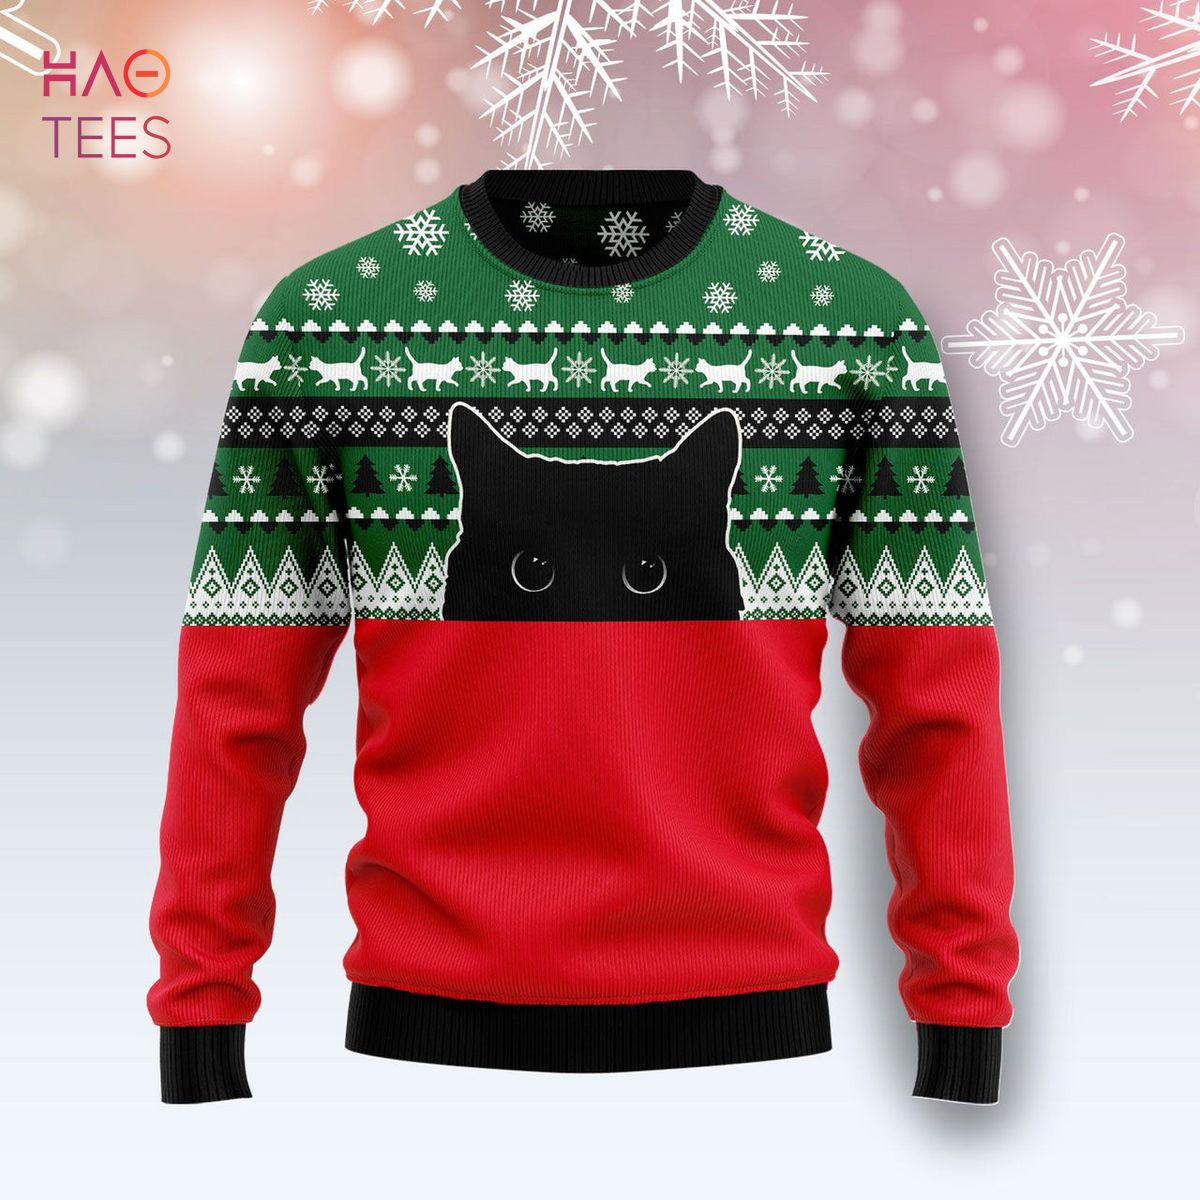 Meow Meow Black Cat Ugly Christmas Sweater